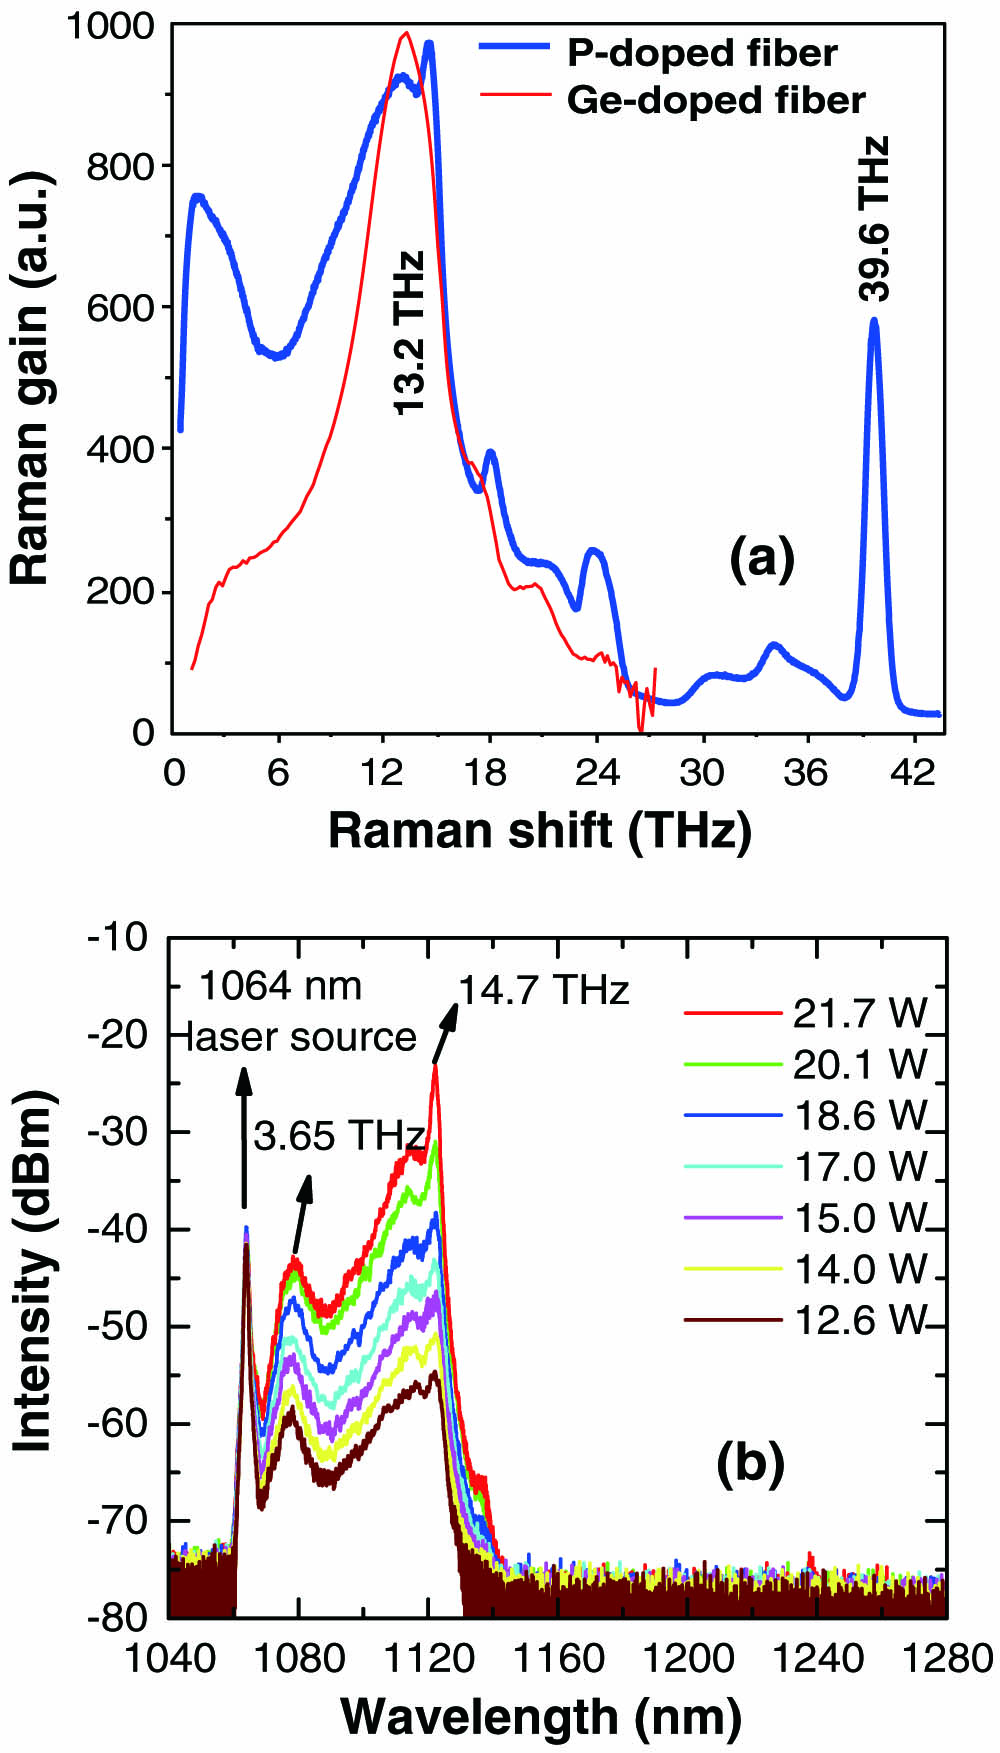 (a) Typical Raman gain spectrum of phosphosilicate fiber [27]. (b) The Raman output spectra of the phosphosilicate fiber we used under different pump powers.